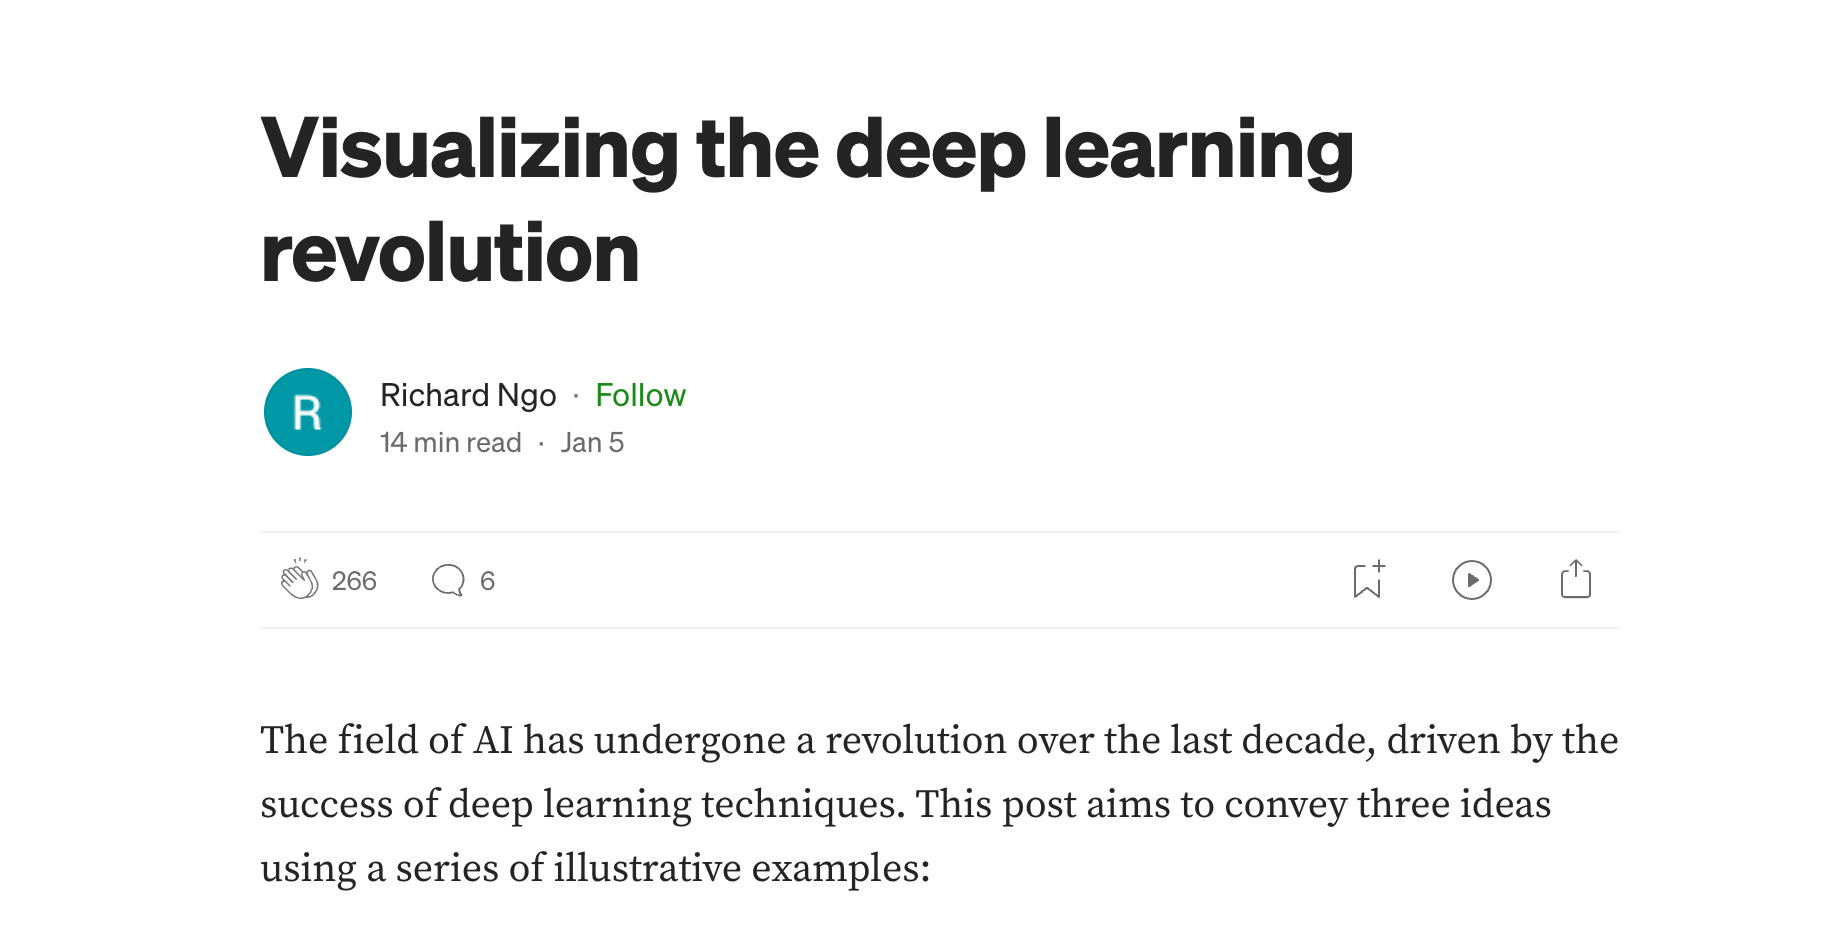 Visualizing the deep learning revolution